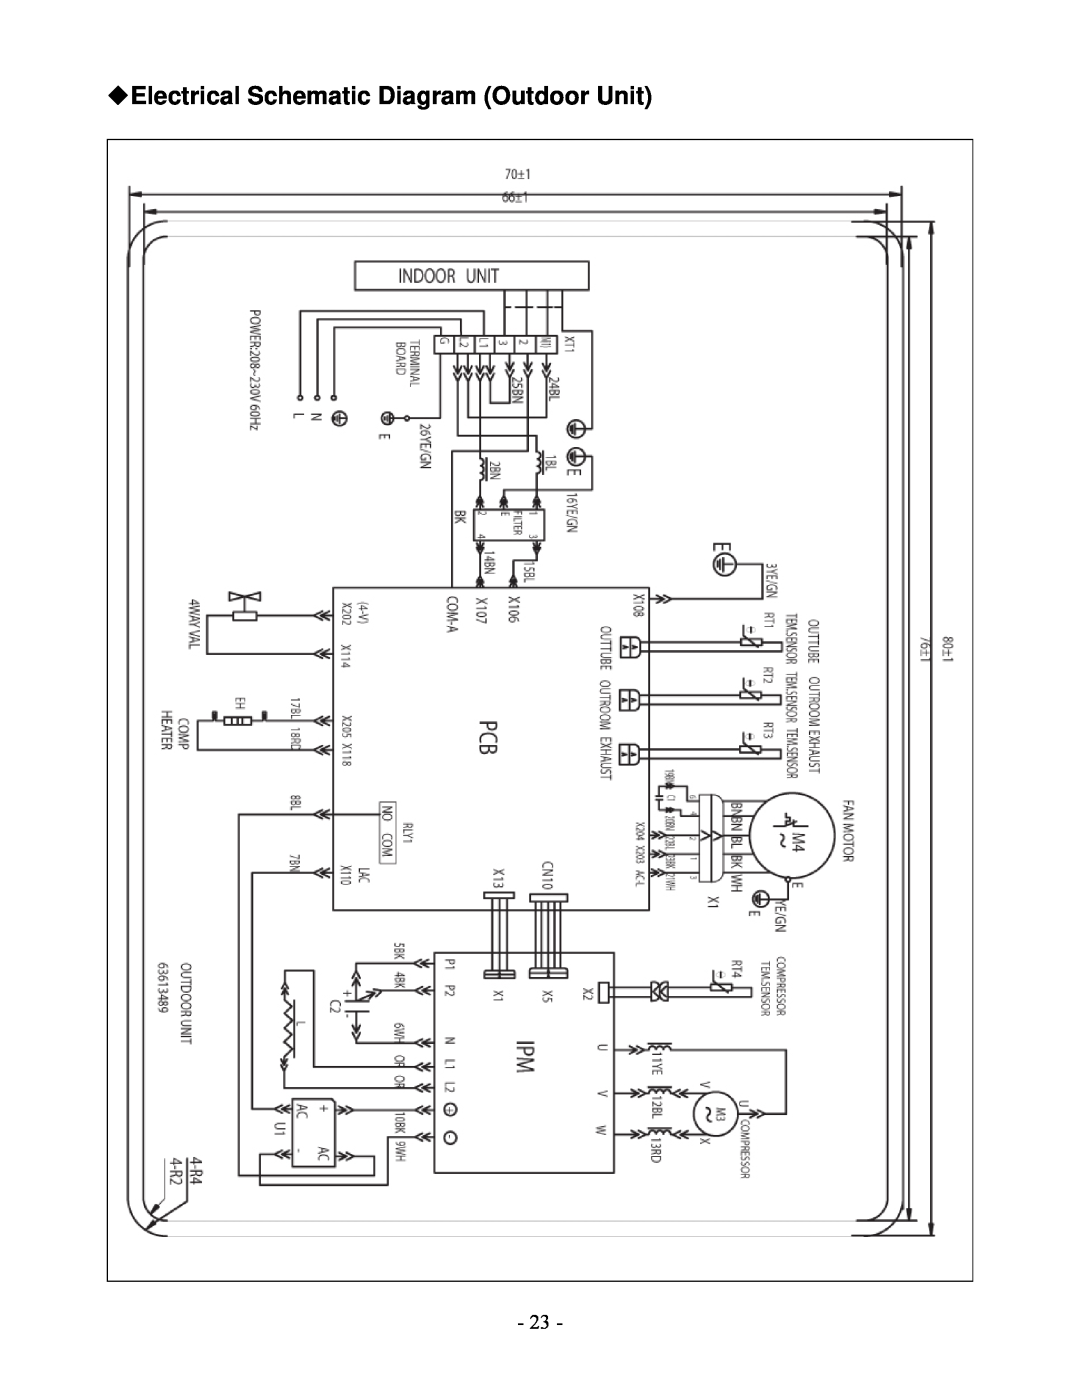 Soleus Air KFHHP-18-OD, KFHHP-18-ID installation manual Electrical Schematic Diagram Outdoor Unit 